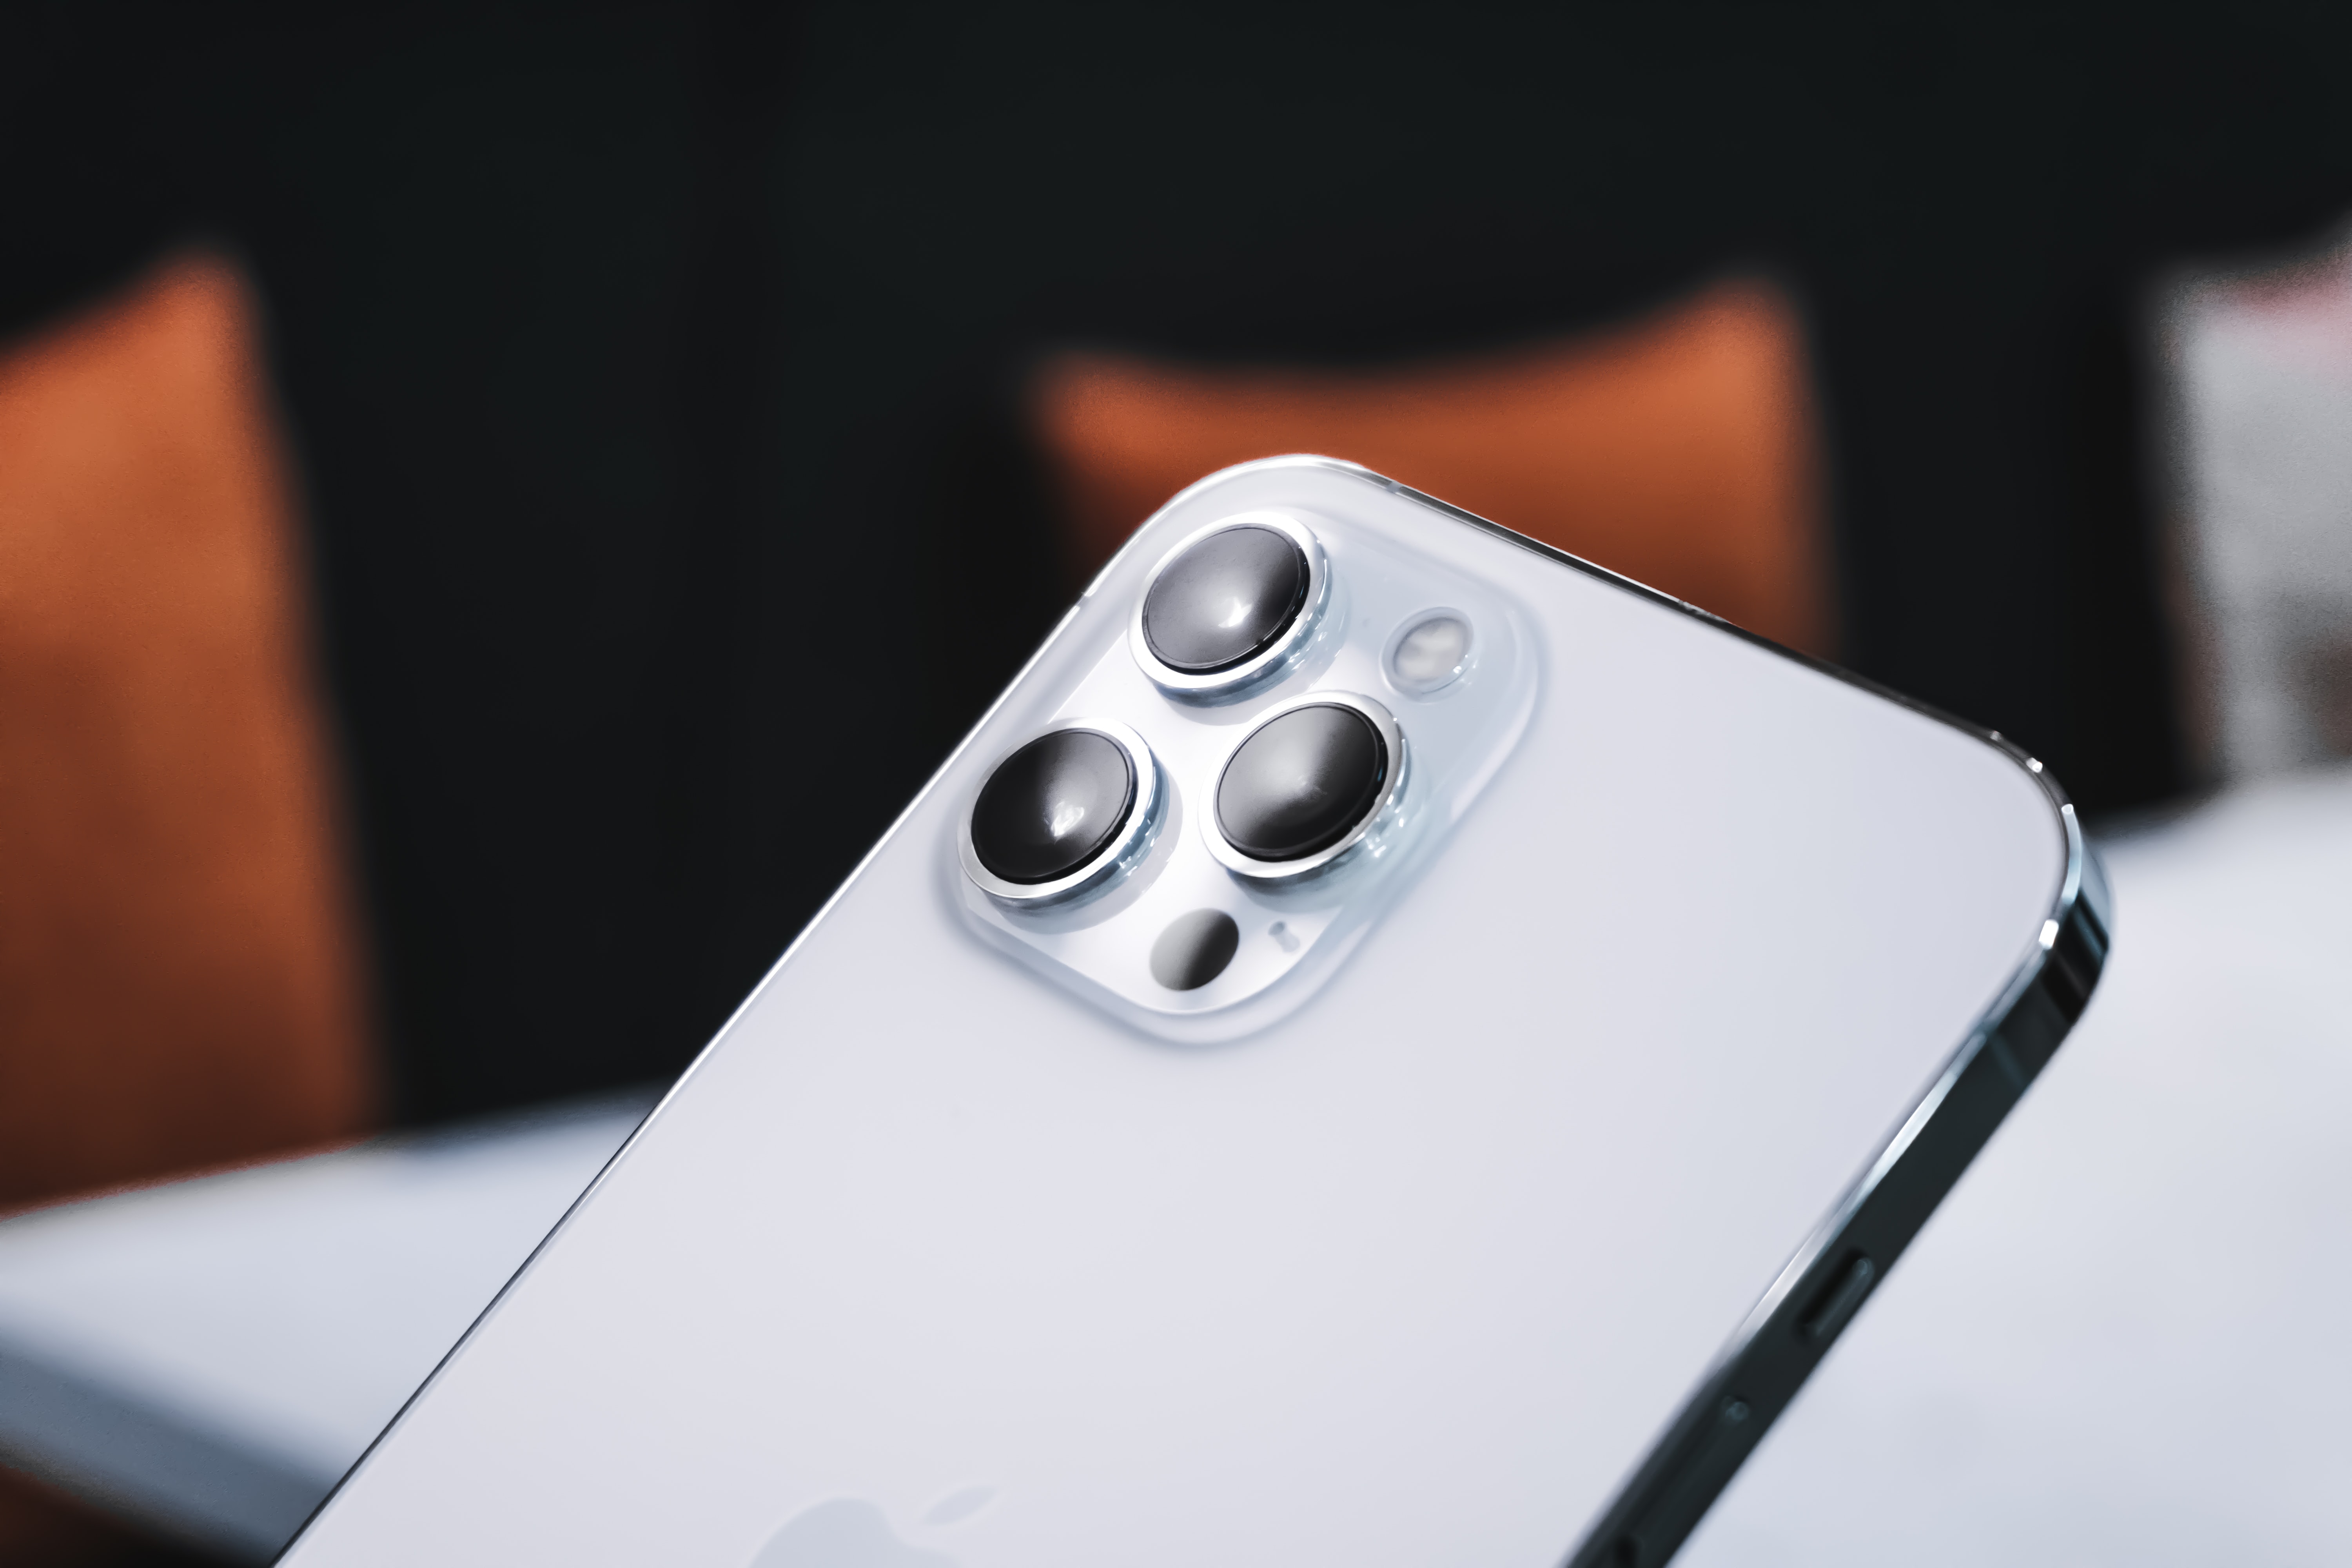 Smartphone Primary Camera Resolution Continues to Improve Amid Growing Pressure on BoM Cost